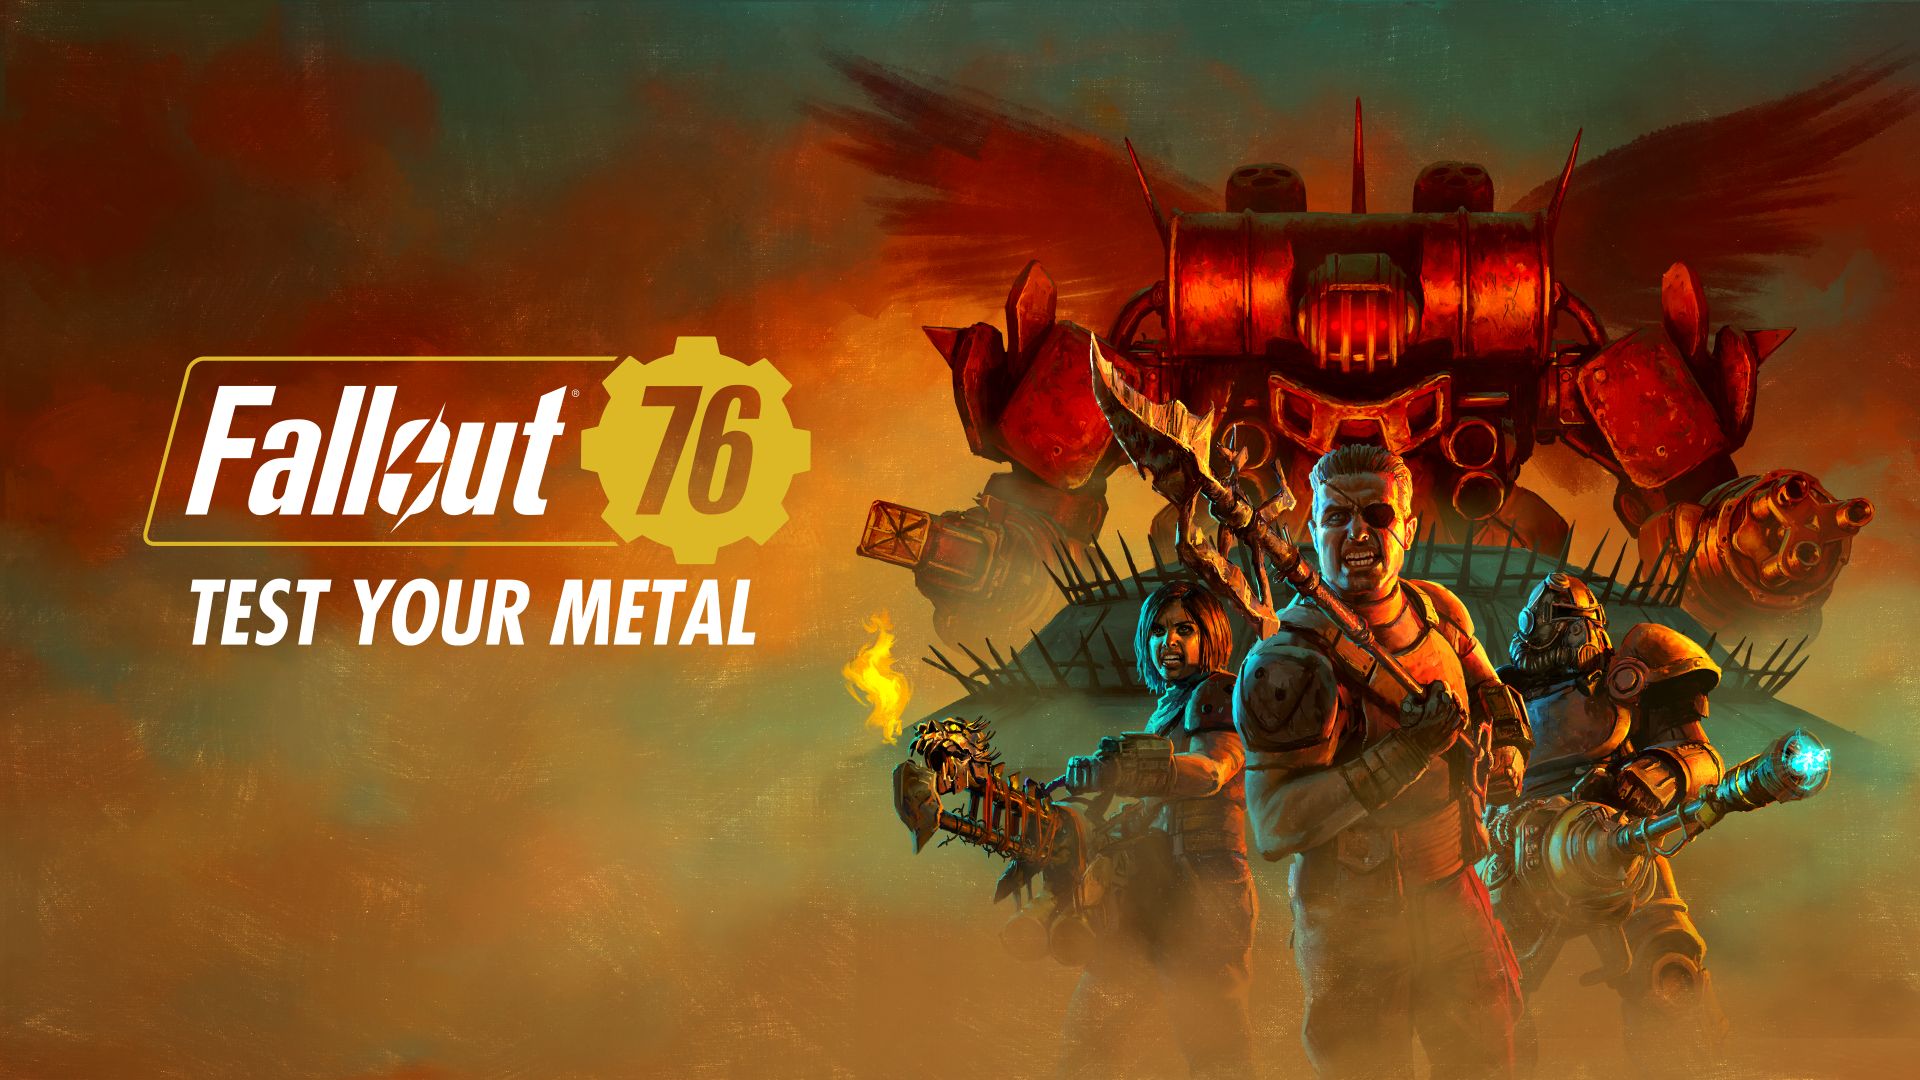 Video For Fallout 76’s Test Your Metal Update is Now Live